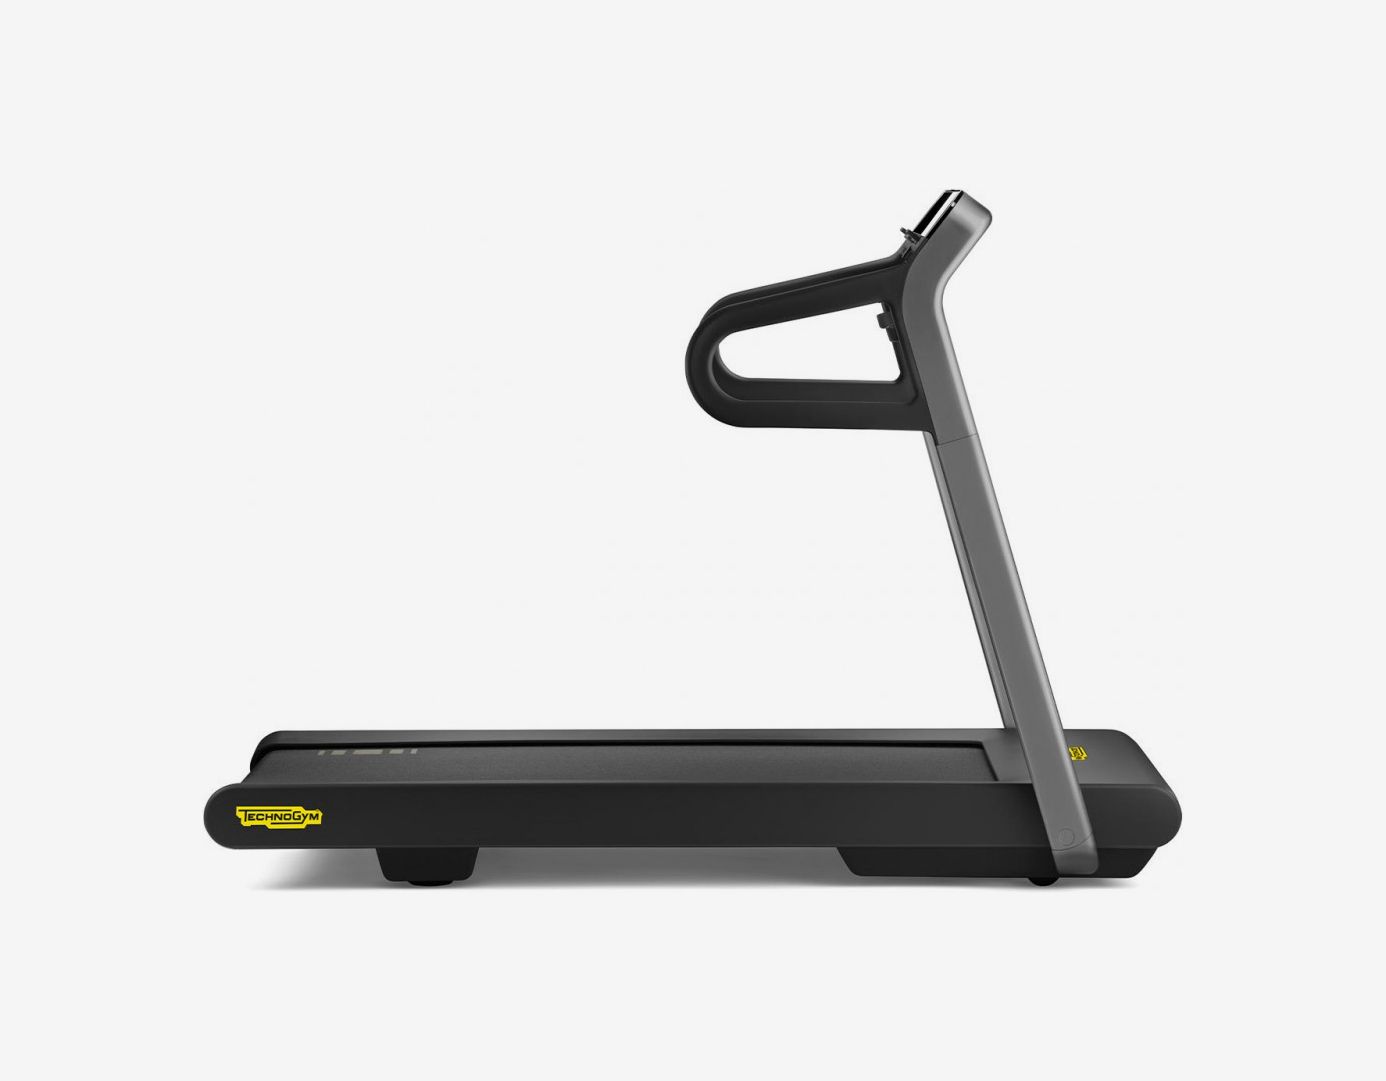 Aldi are selling cheap gym equipment! Great home workouts sorted.